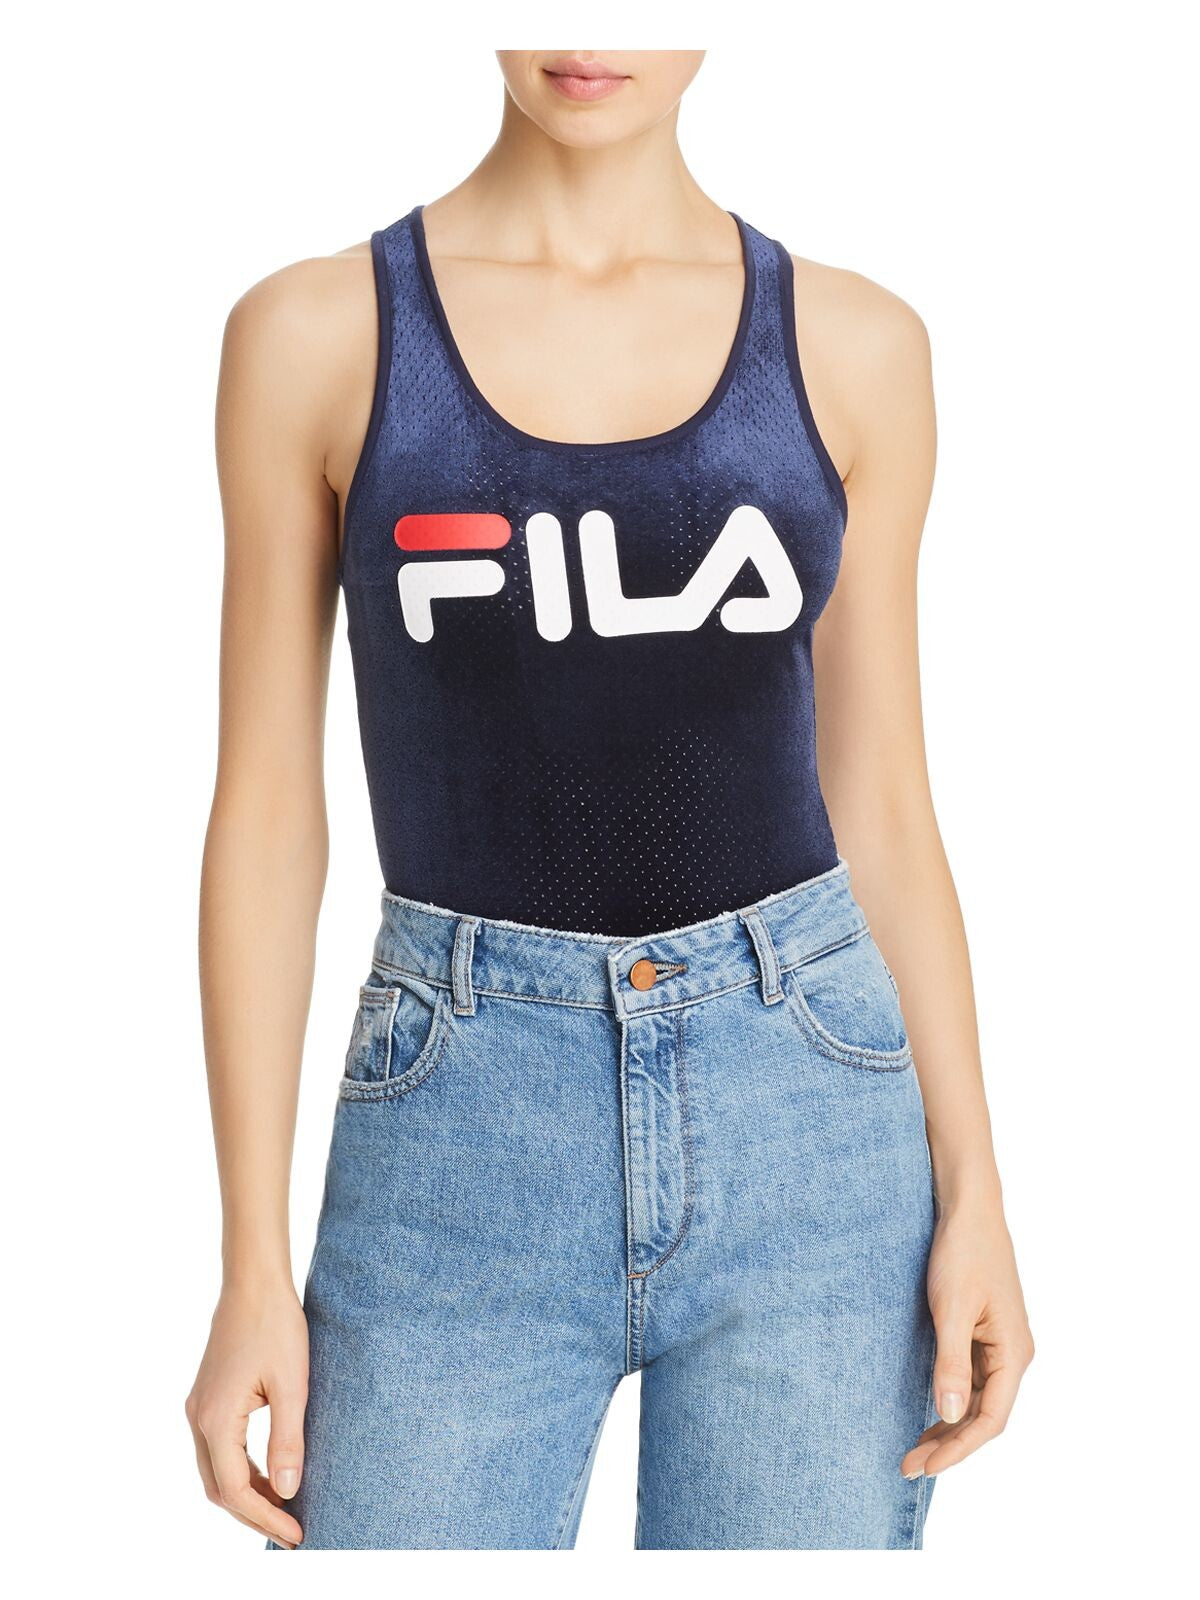 FILA Womens Navy Racerback Perforated Snap Closures Logo Graphic Sleeveless Scoop Neck Body Suit Top XS